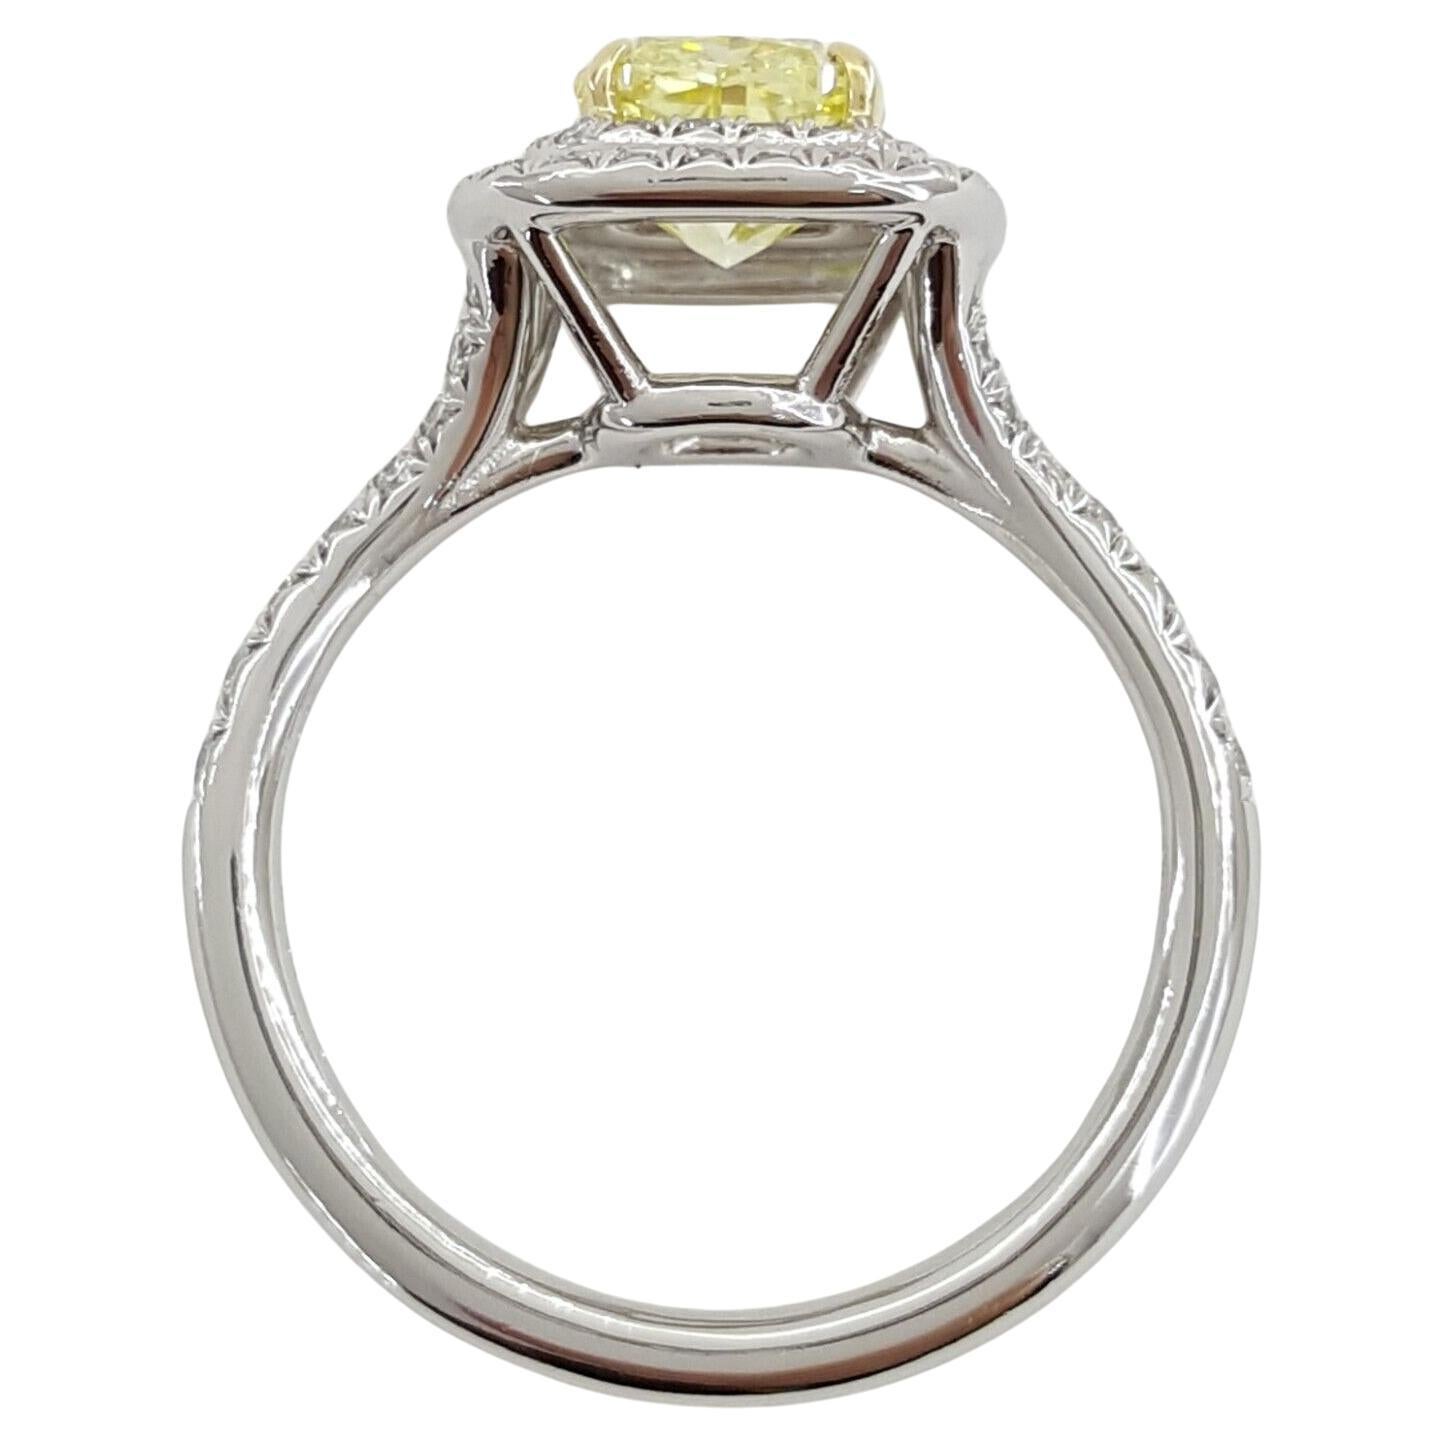 Discover the epitome of elegance with the Tiffany & Co. Soleste® Engagement Ring featuring a stunning 1.78 ct Fancy Intense Yellow Cushion Brilliant Cut Diamond. Set in a luxurious halo of platinum and 18k yellow gold, this masterpiece weighs 5